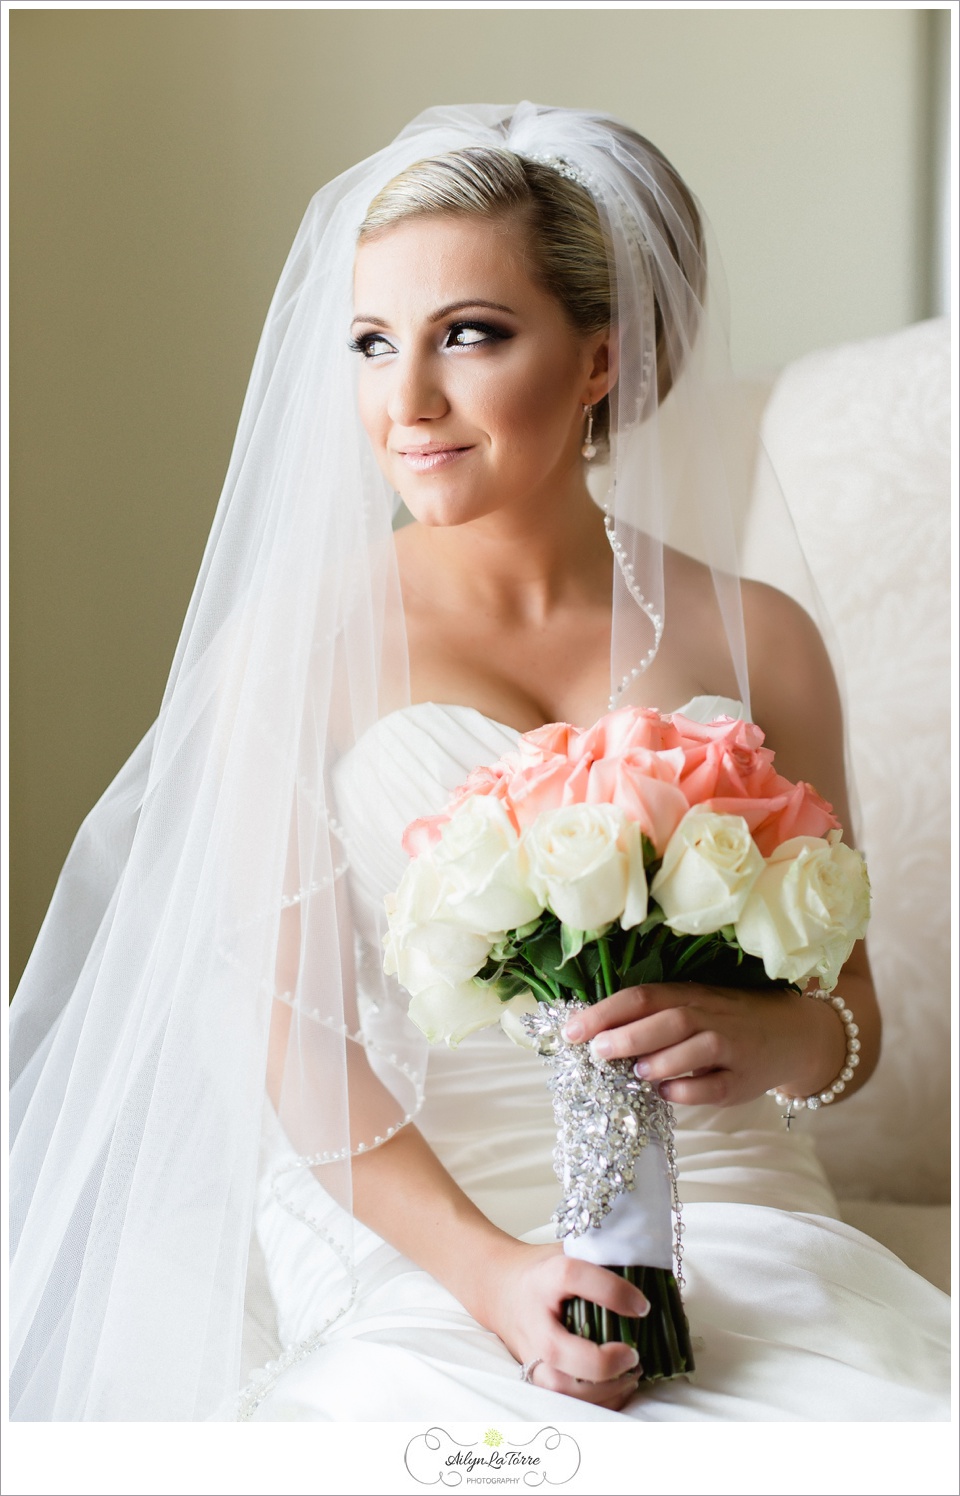 Tampa Wedding Photographer |  © Ailyn La Torre Photography 2014